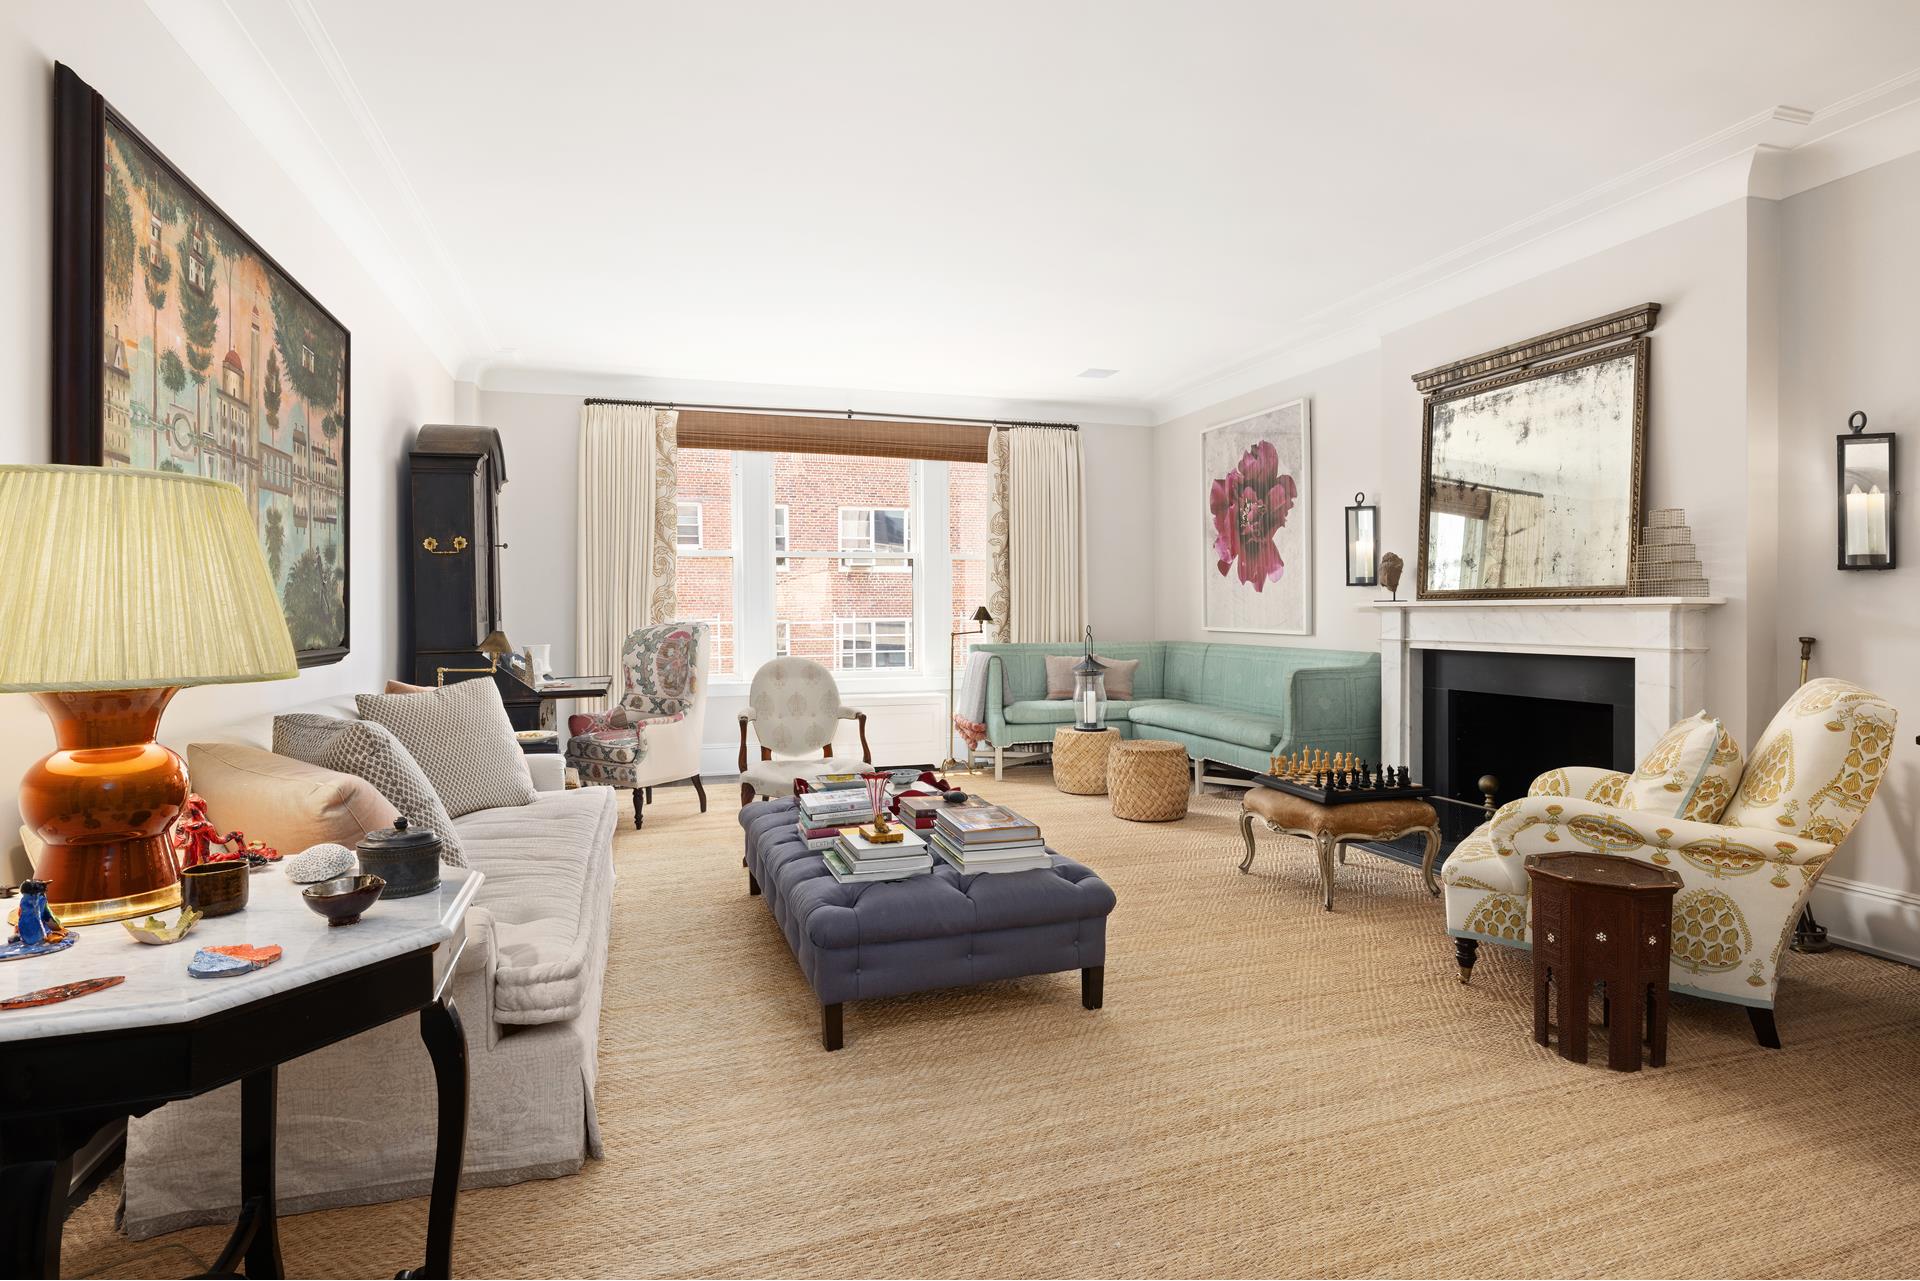 1160 Park Avenue 14Ac, Carnegie Hill, Upper East Side, NYC - 4 Bedrooms  
3.5 Bathrooms  
8 Rooms - 